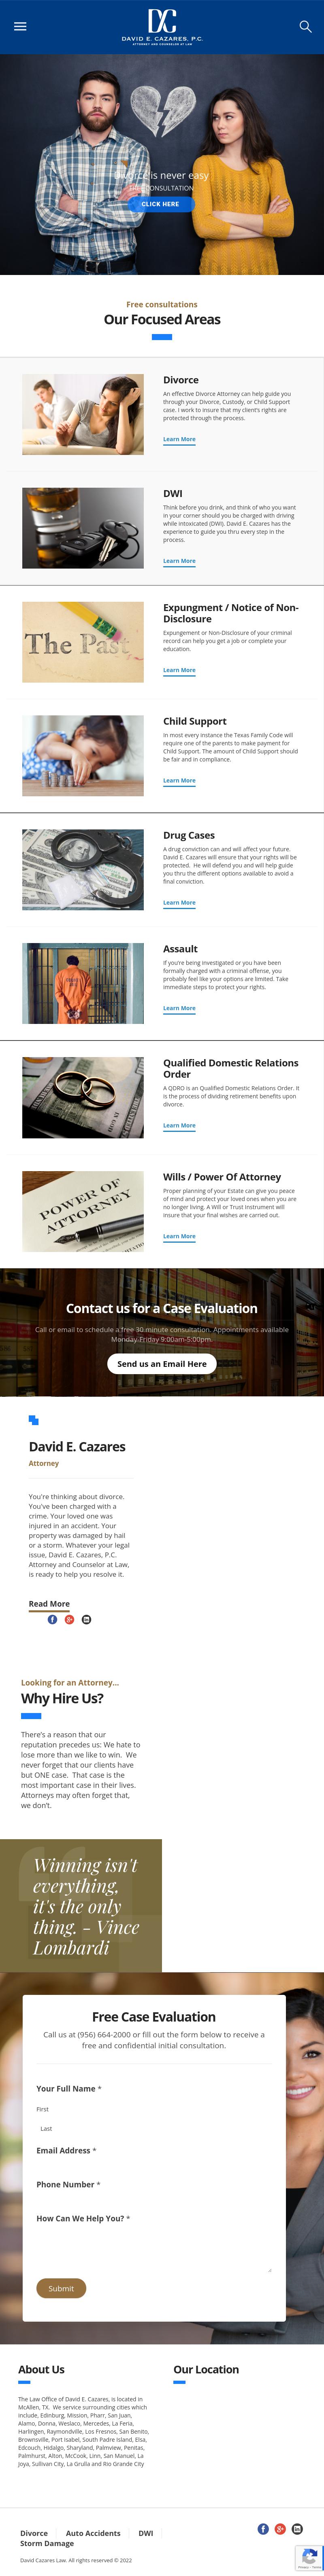 David E. Cazares, P.C. Attorney and Counselor at Law - McAllen TX Lawyers